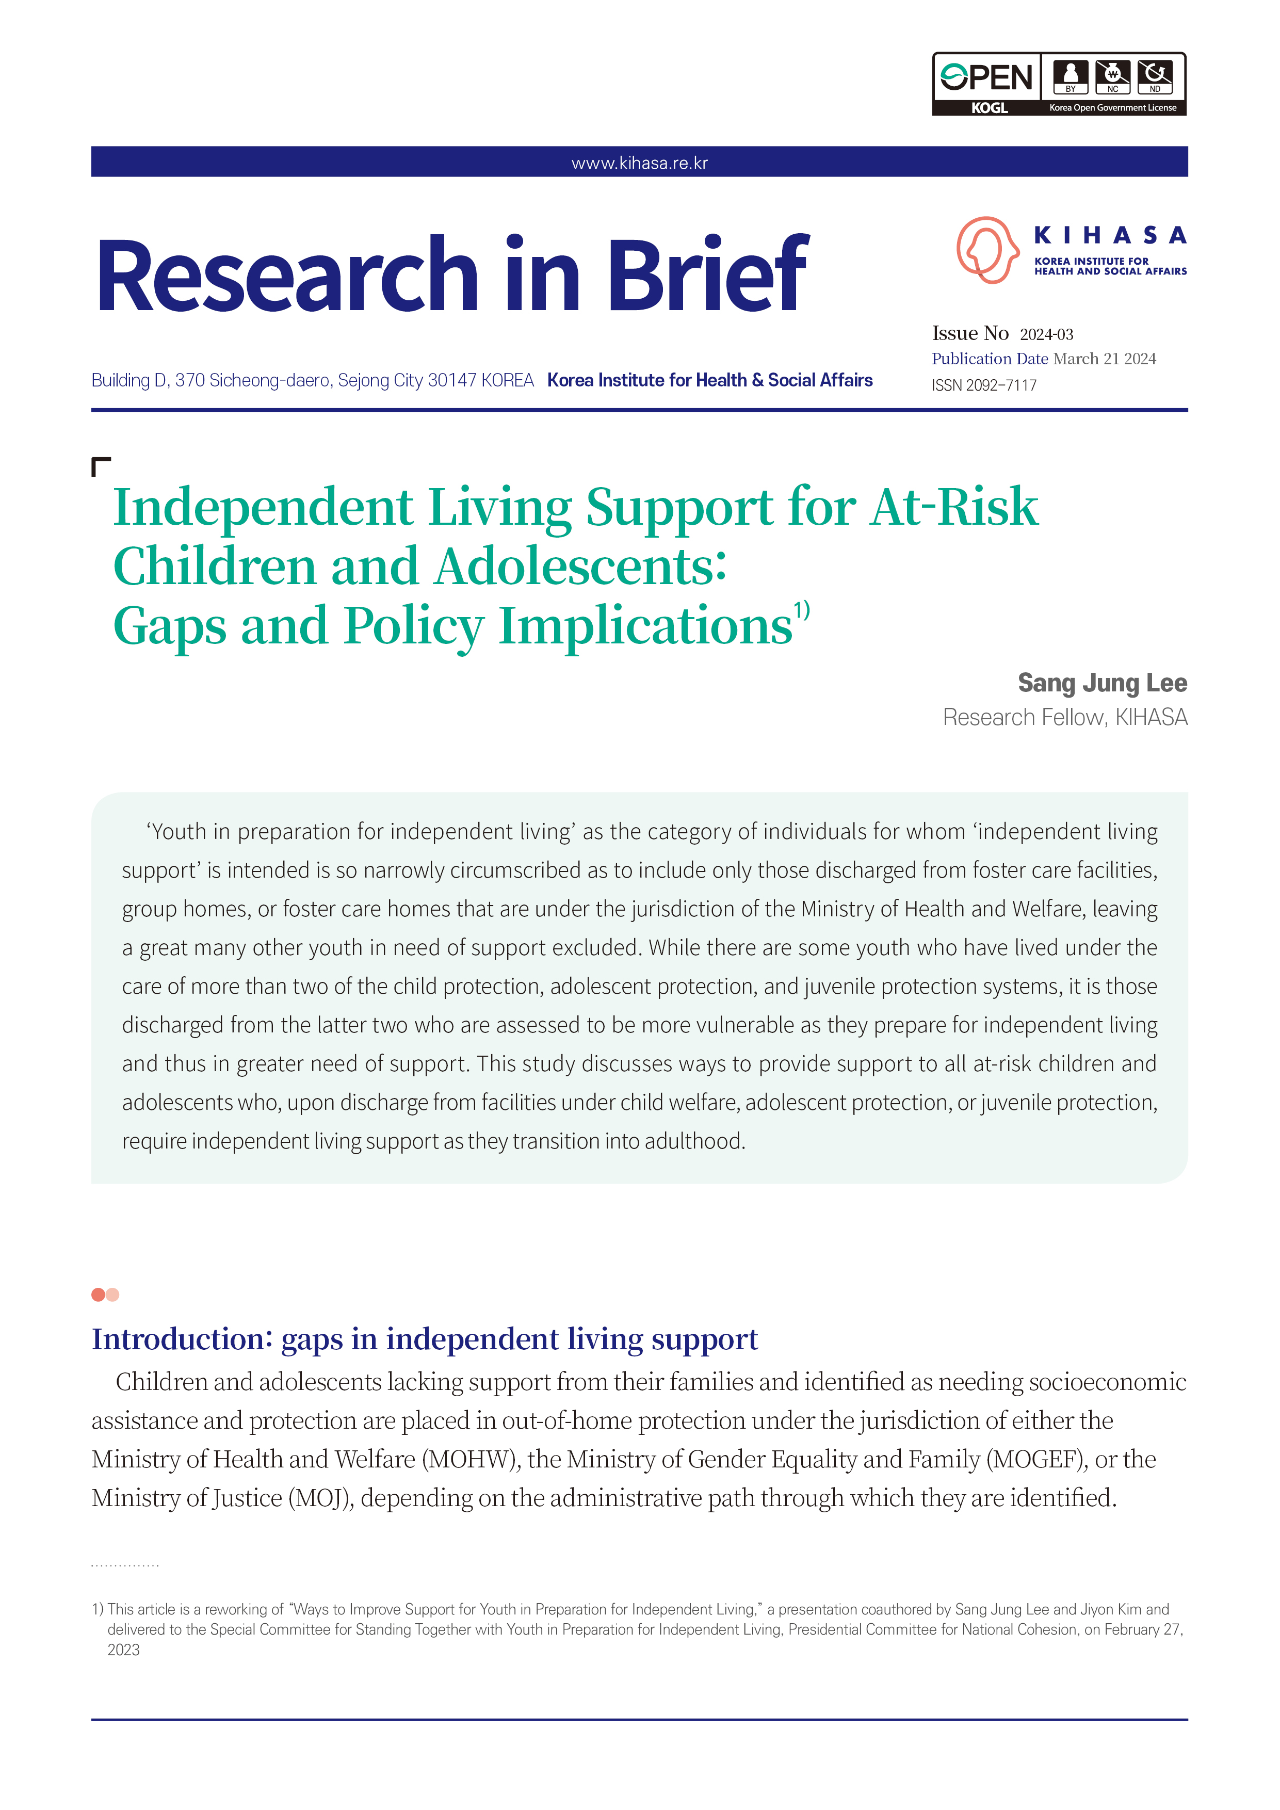 Independent Living Support for At-Risk Children and Adolescents: Gaps and Policy Implications